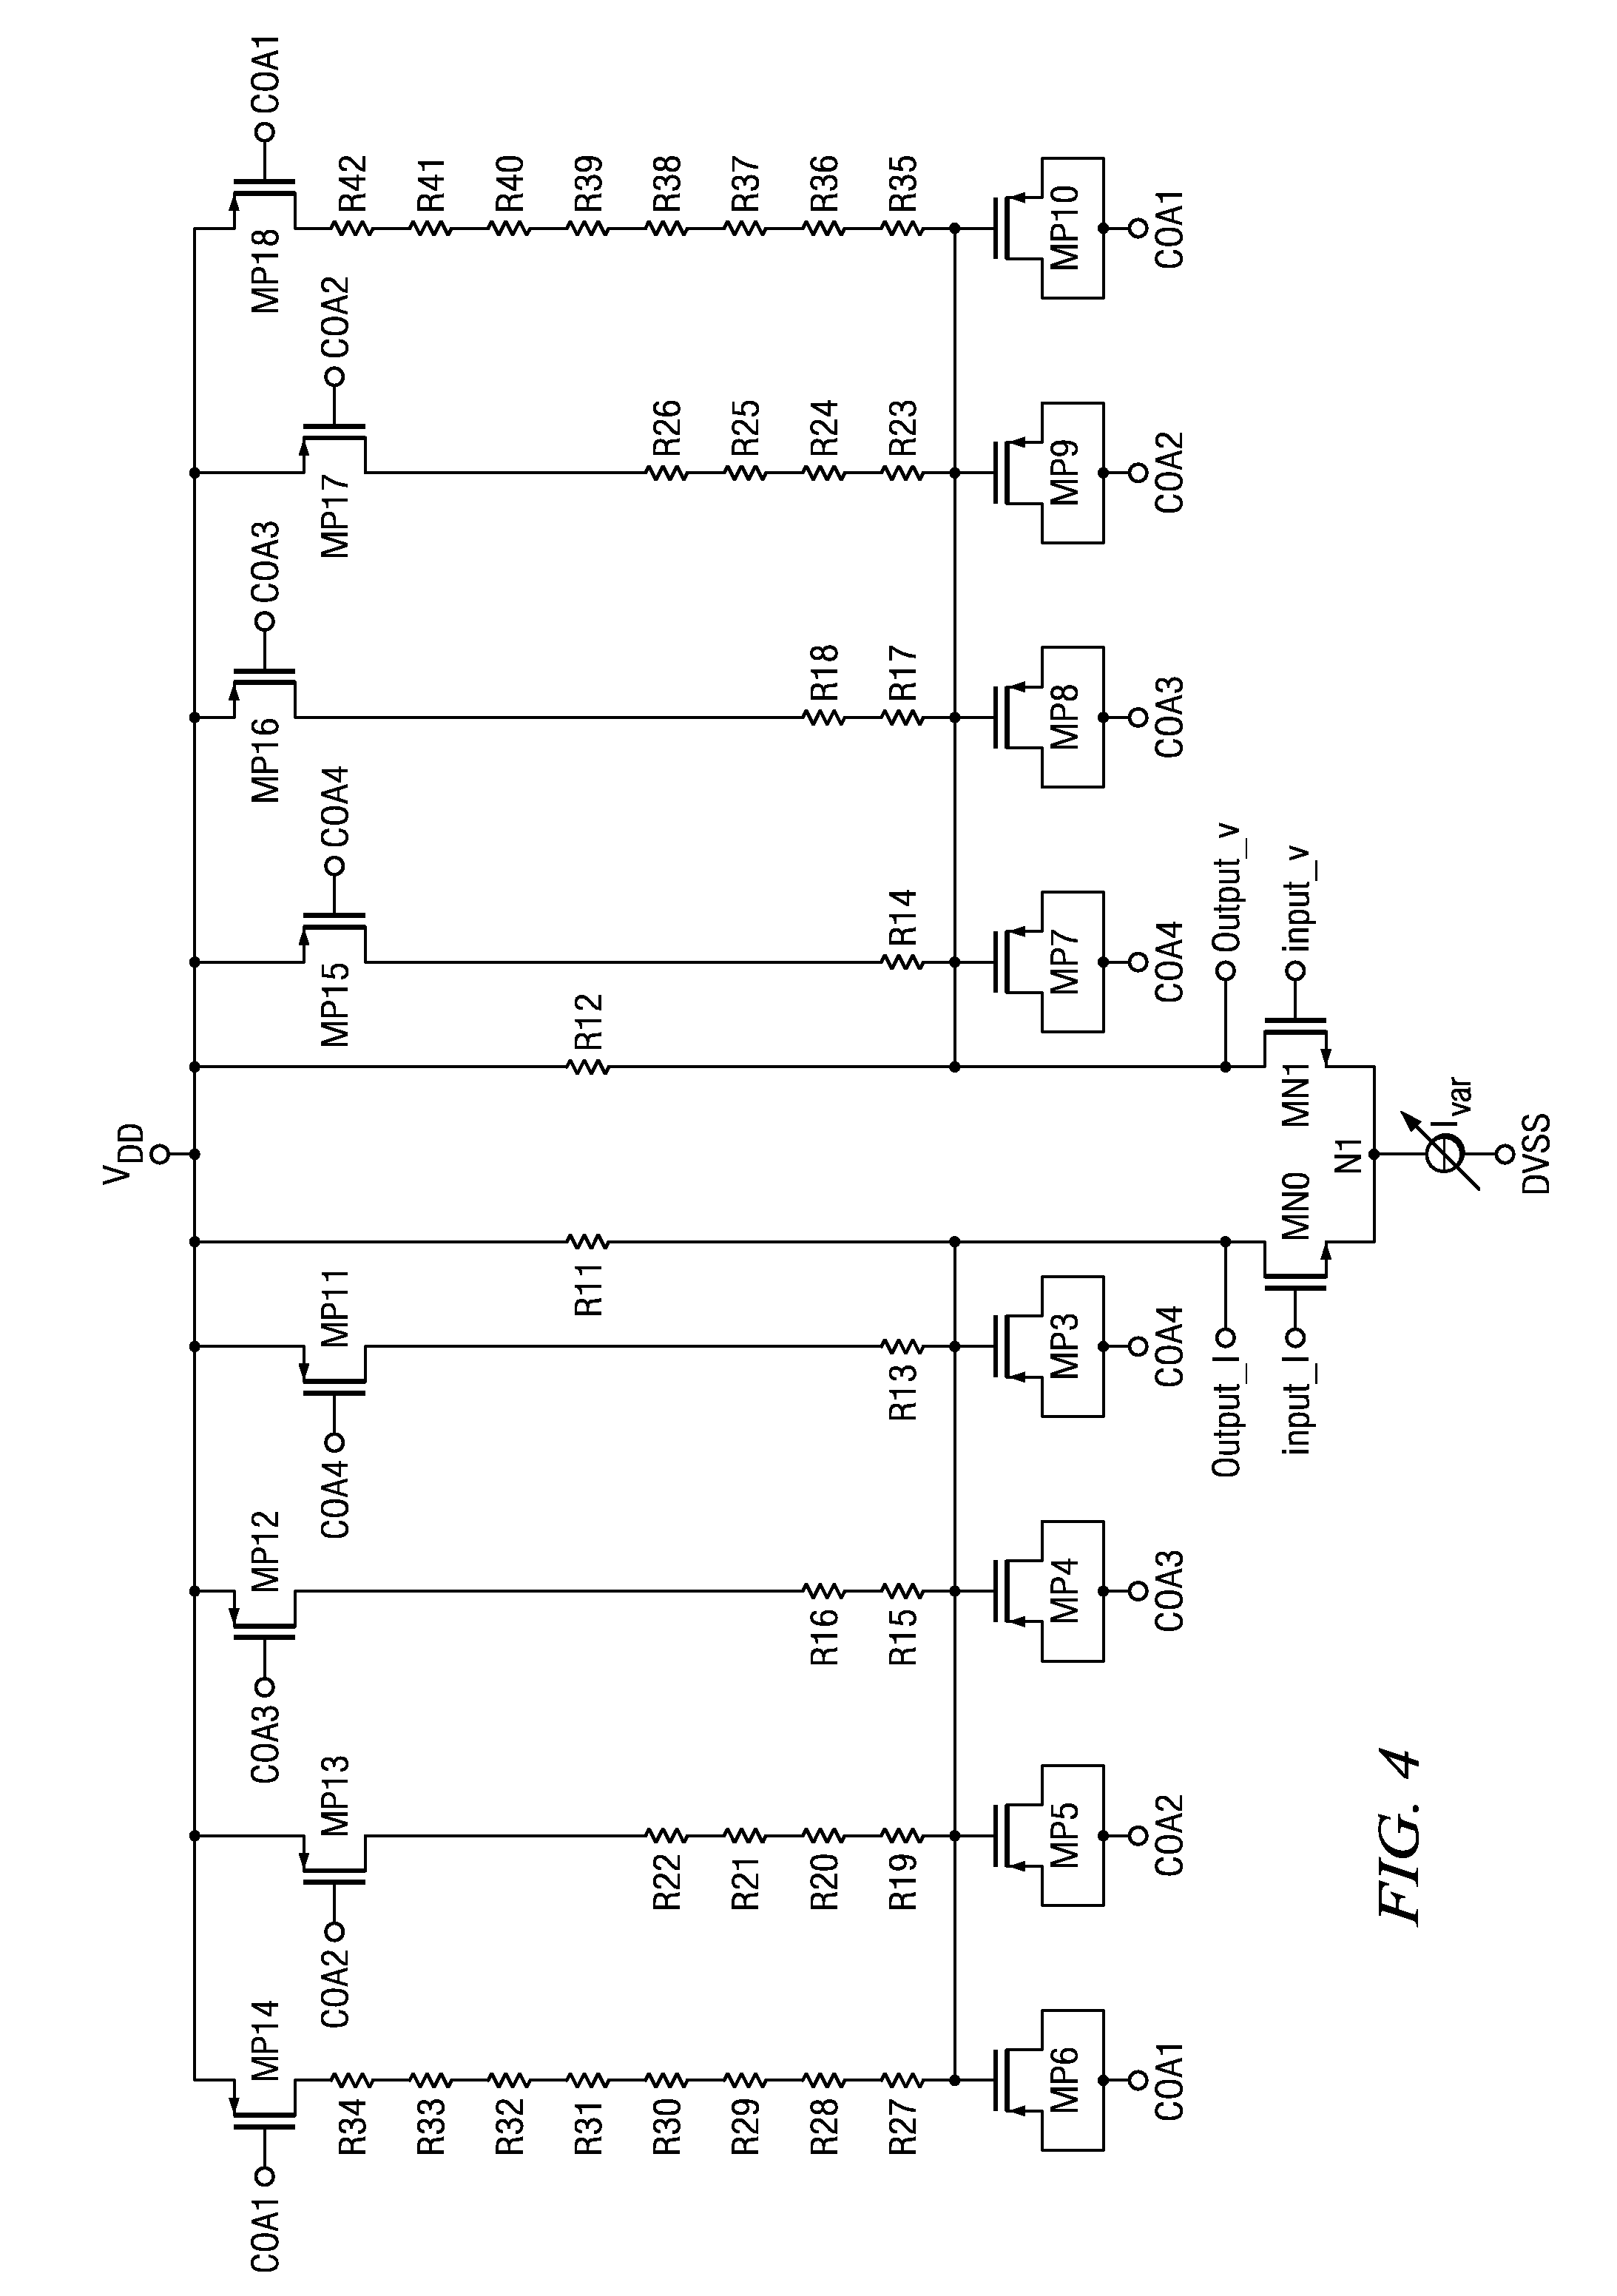 Method and apparatus of a ring oscillator for phase locked loop (PLL)